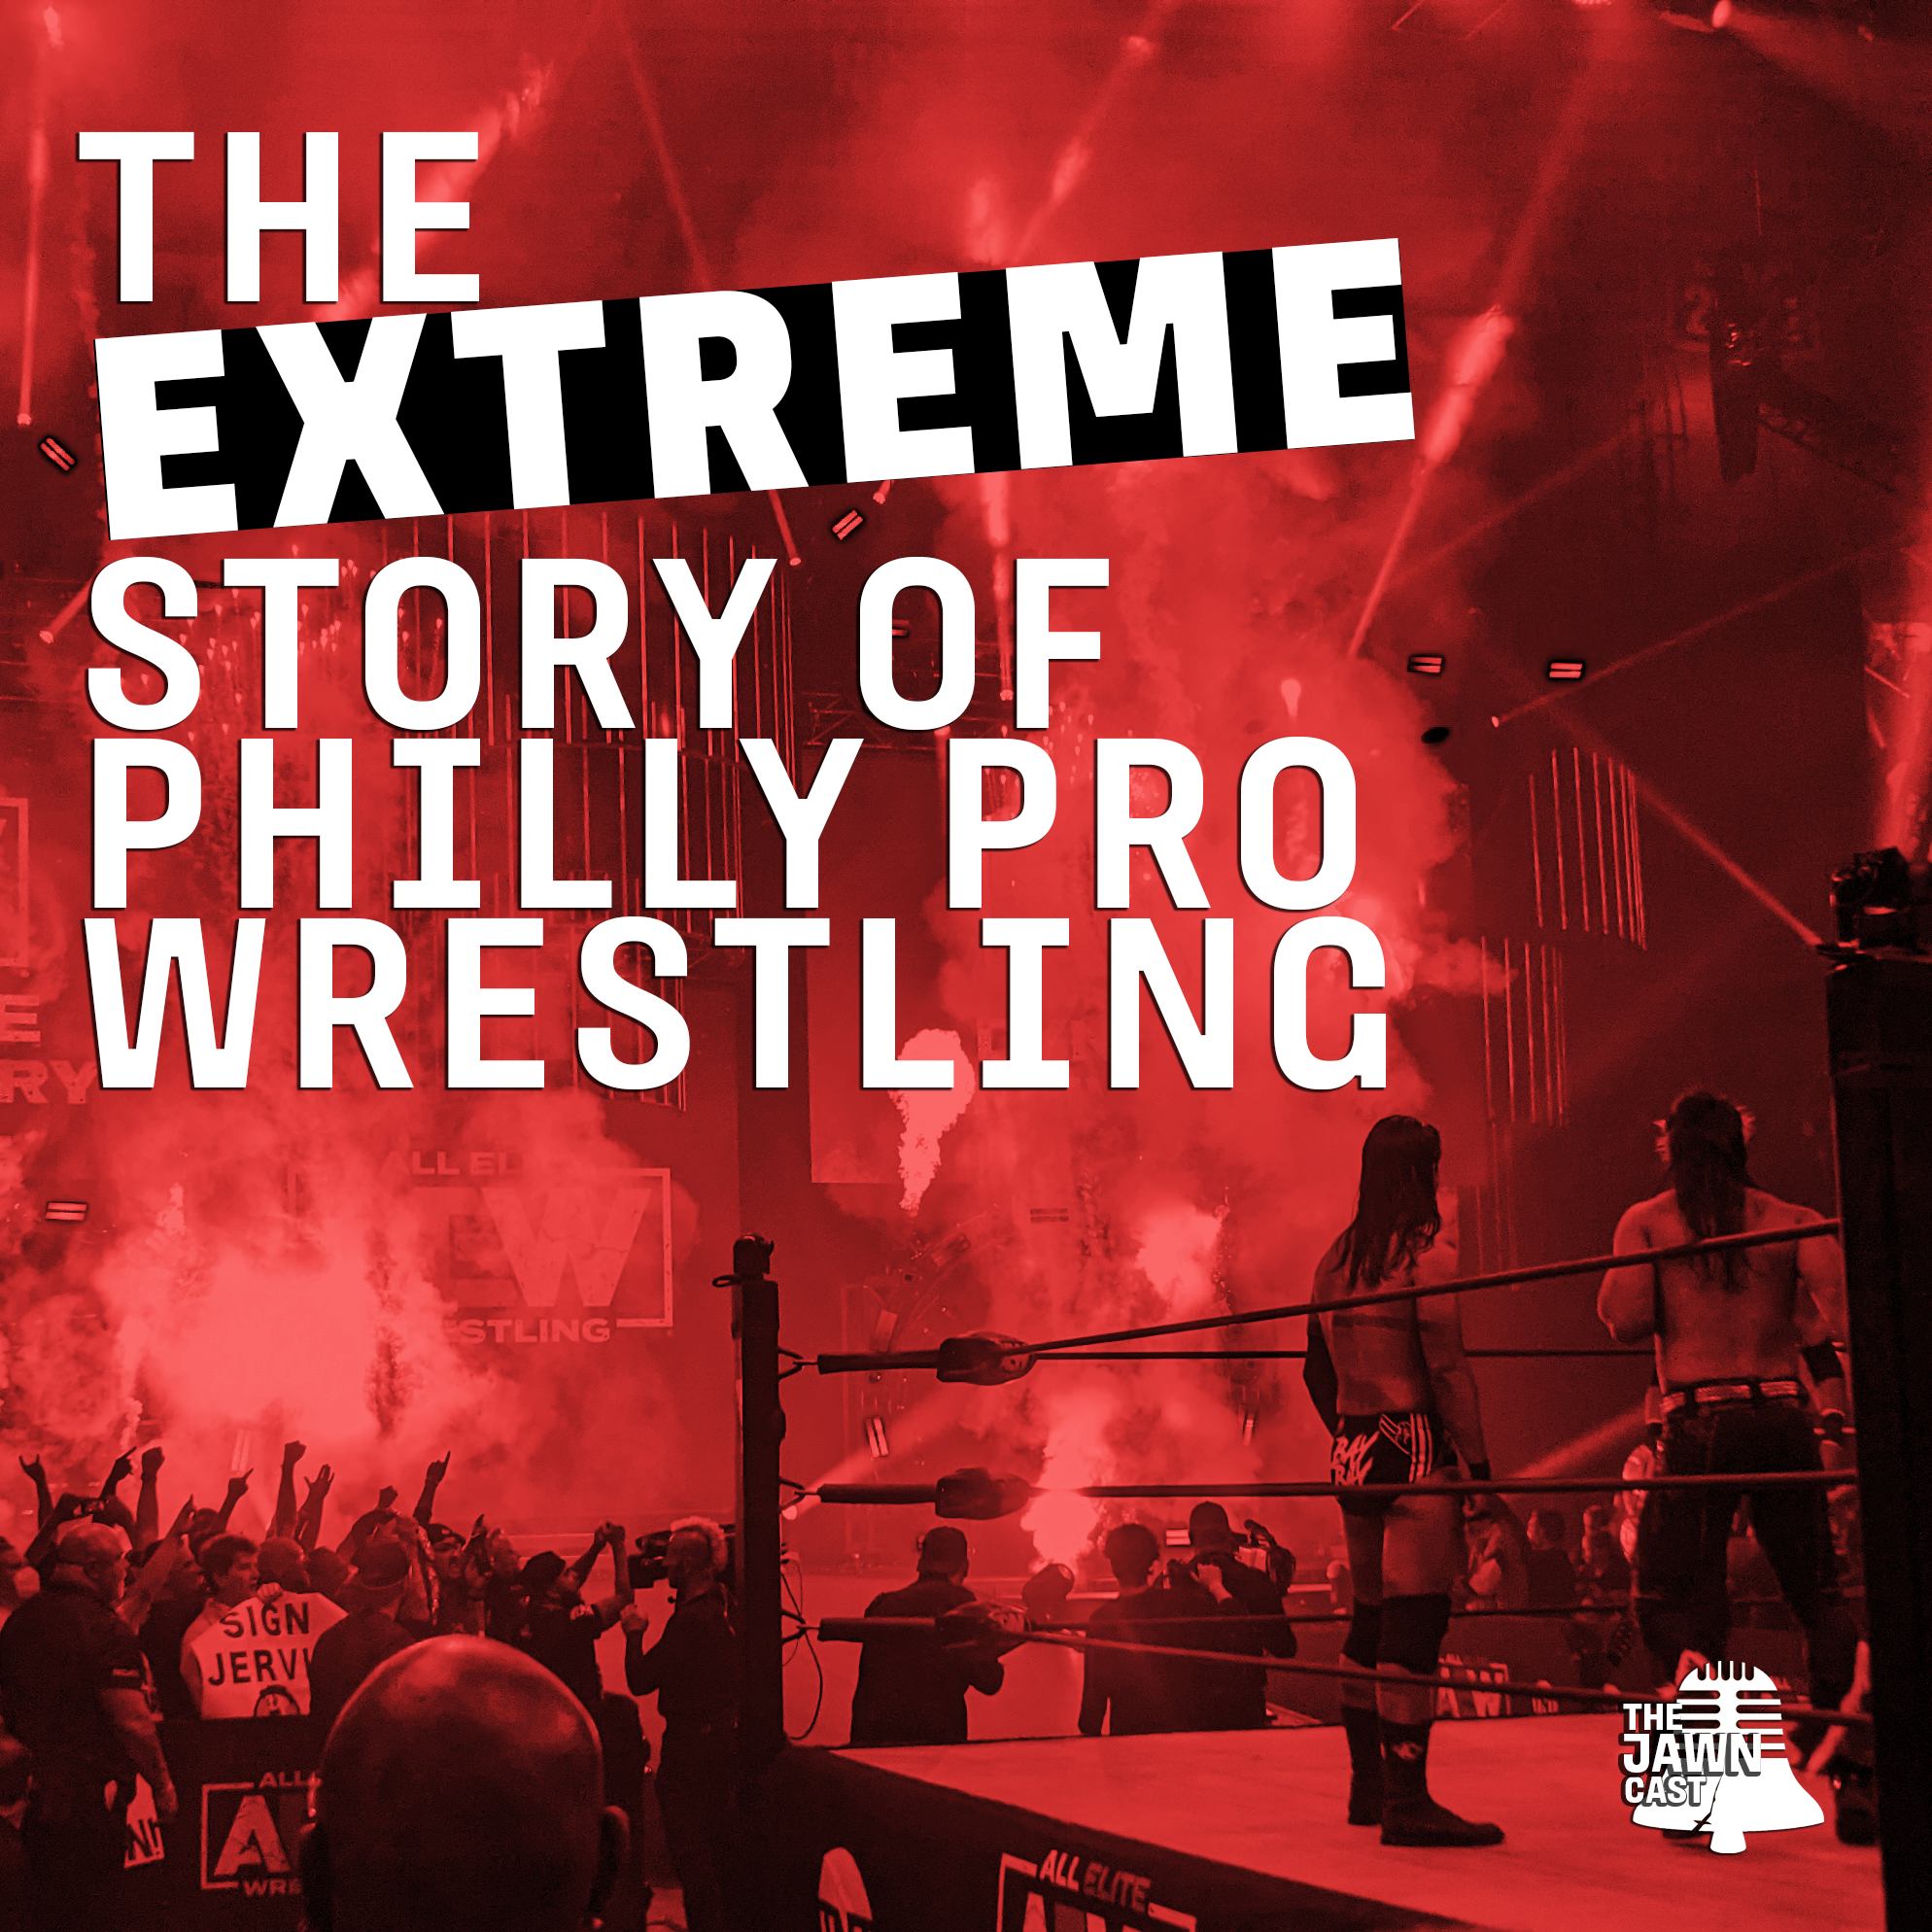 Flaming chairs and hardcore heroes: the extreme story of Philly pro wrestling